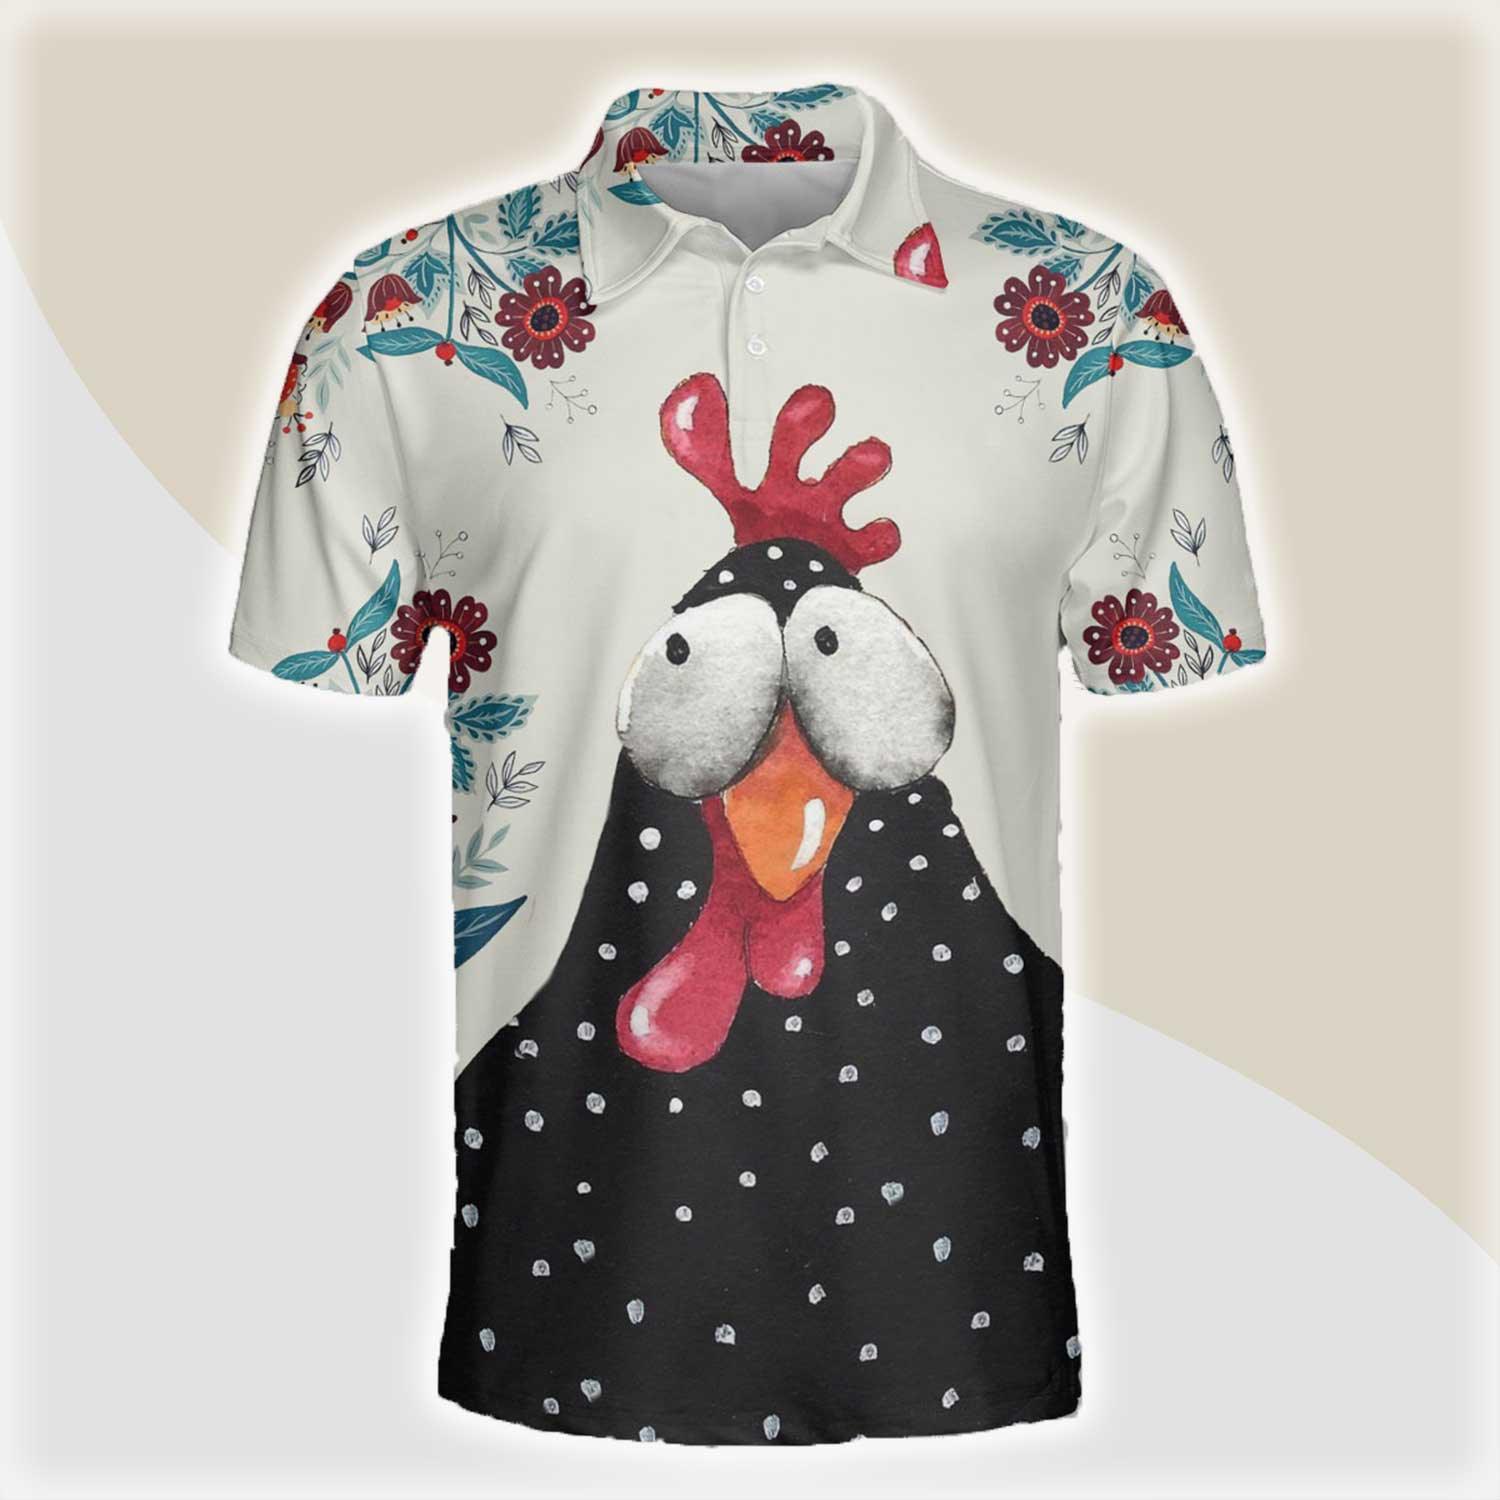 Chicken Men Polo Shirts For Summer - Cute Chicken Flower Pattern Button Shirts For Men - Perfect Gift For Chicken Lovers, Animal Lovers - Amzanimalsgift